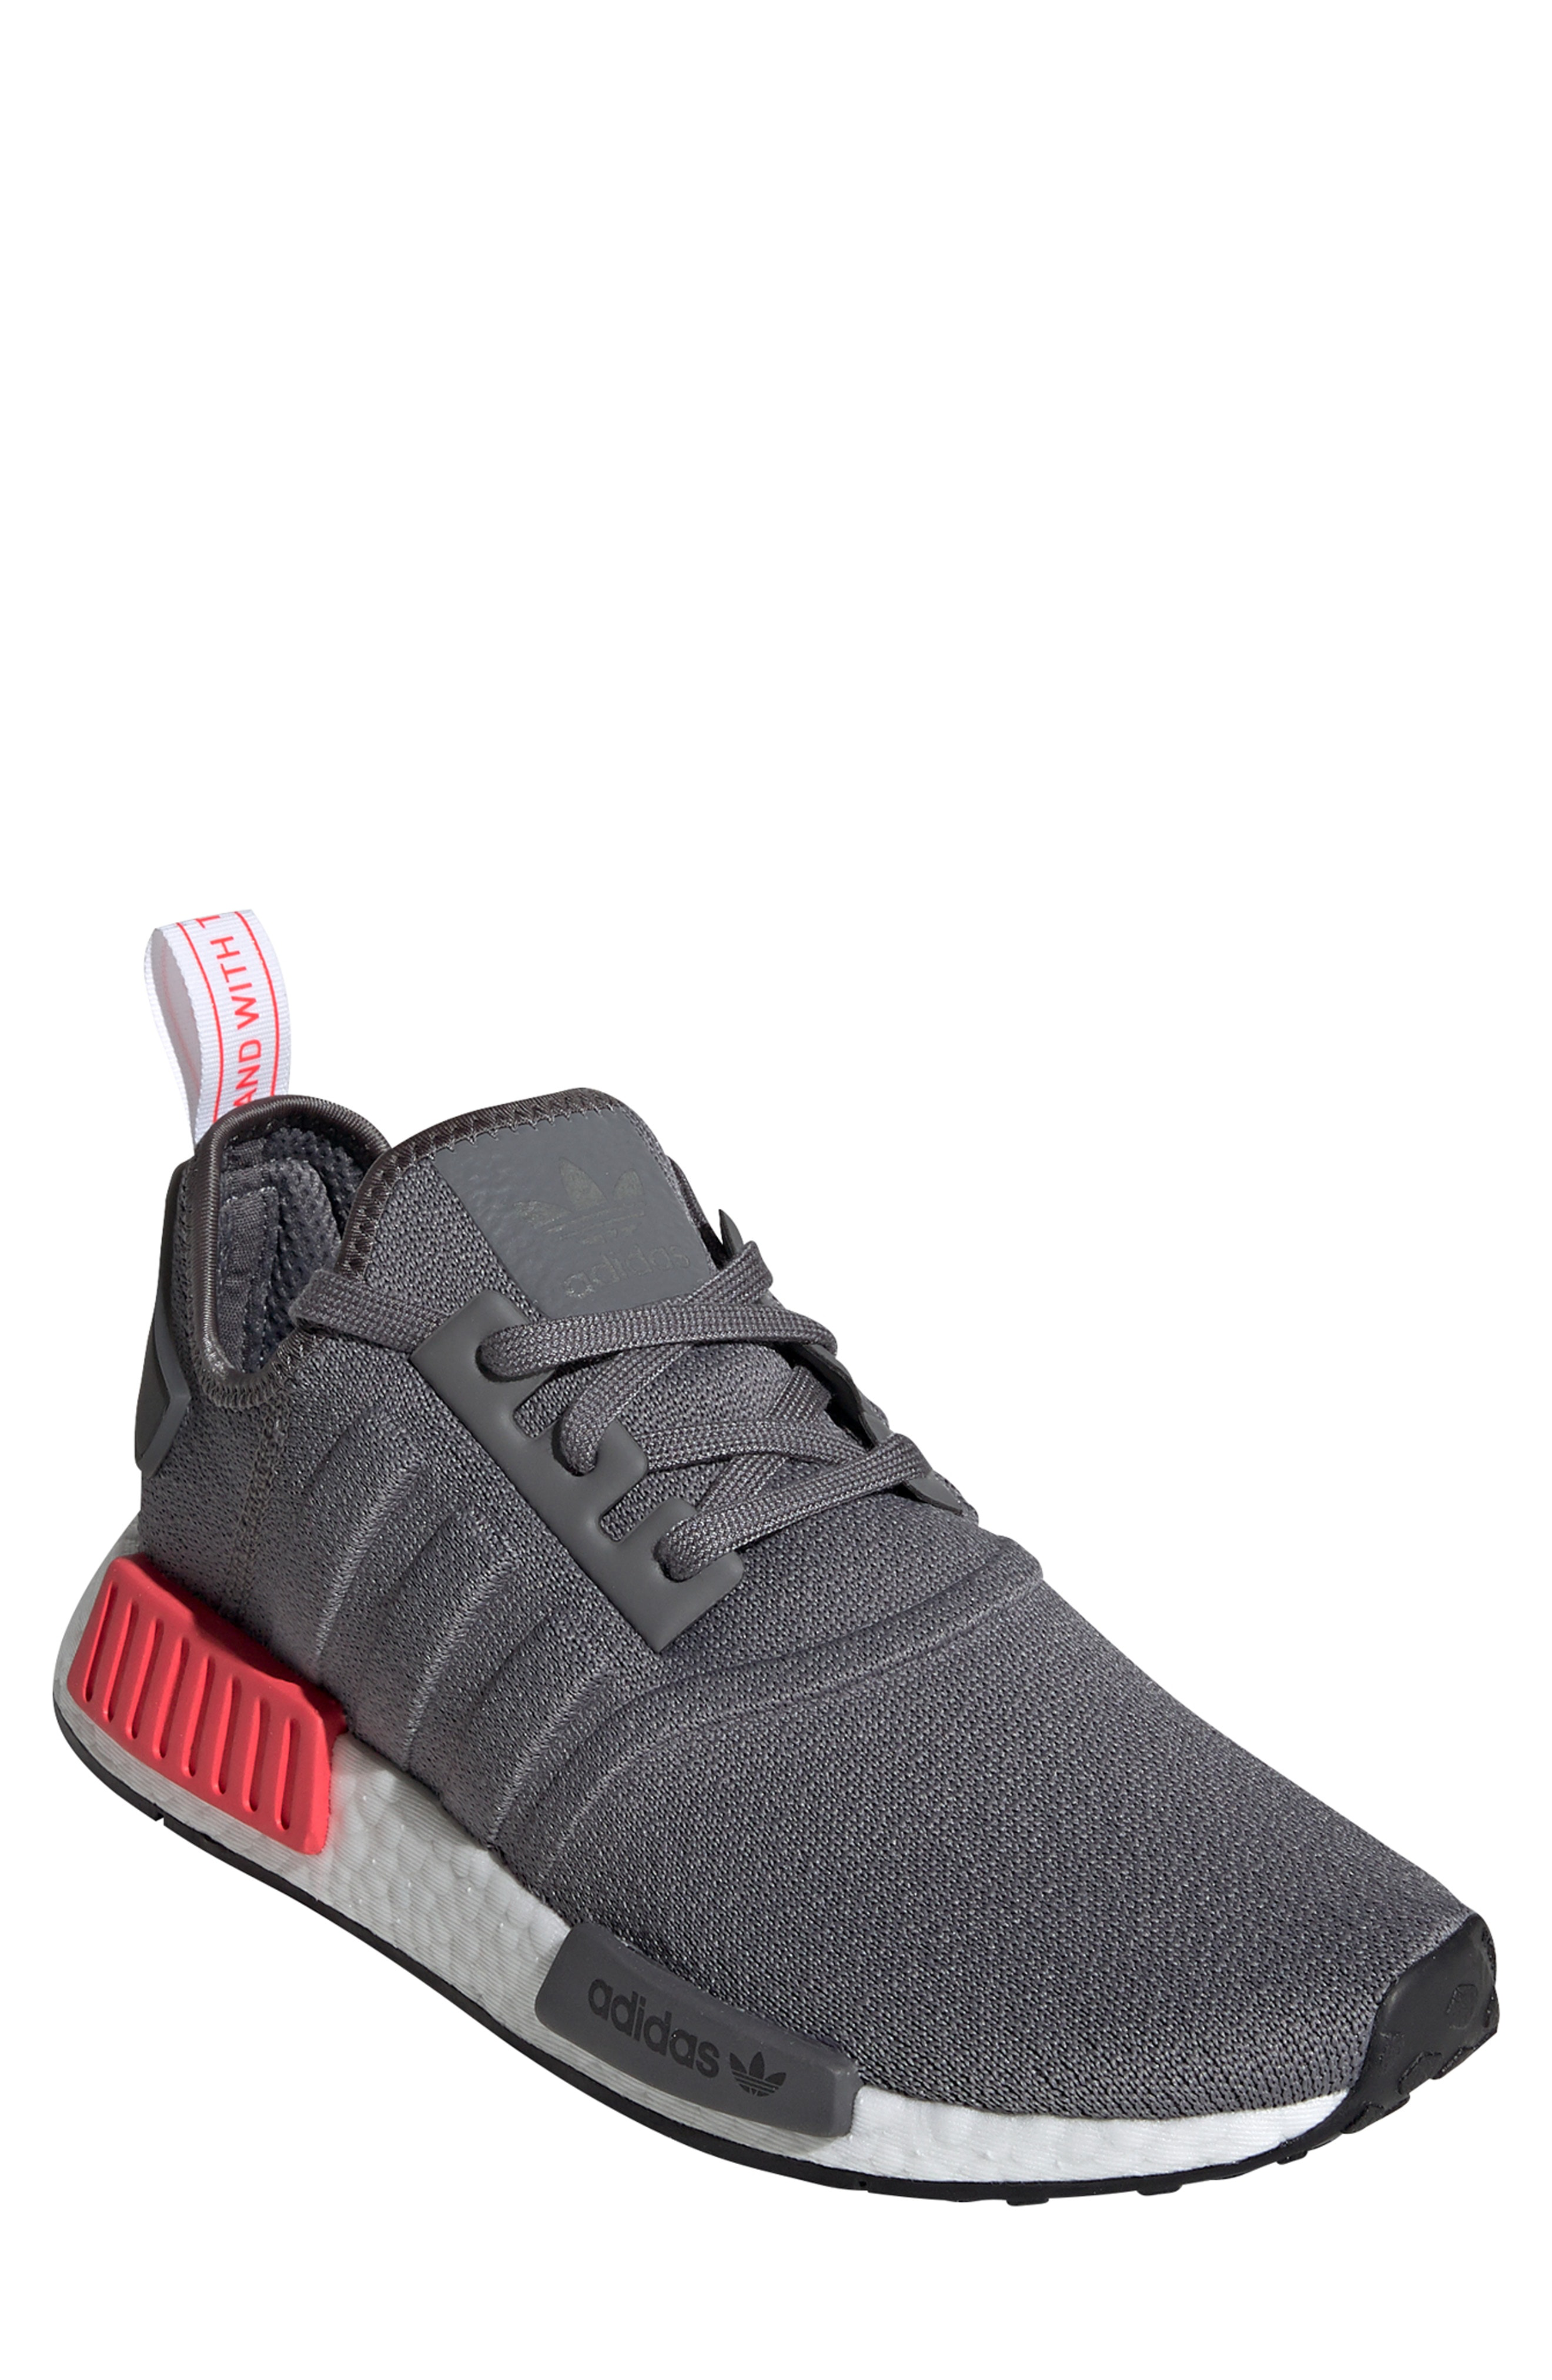 adidas men's nmd r1 casual sneakers